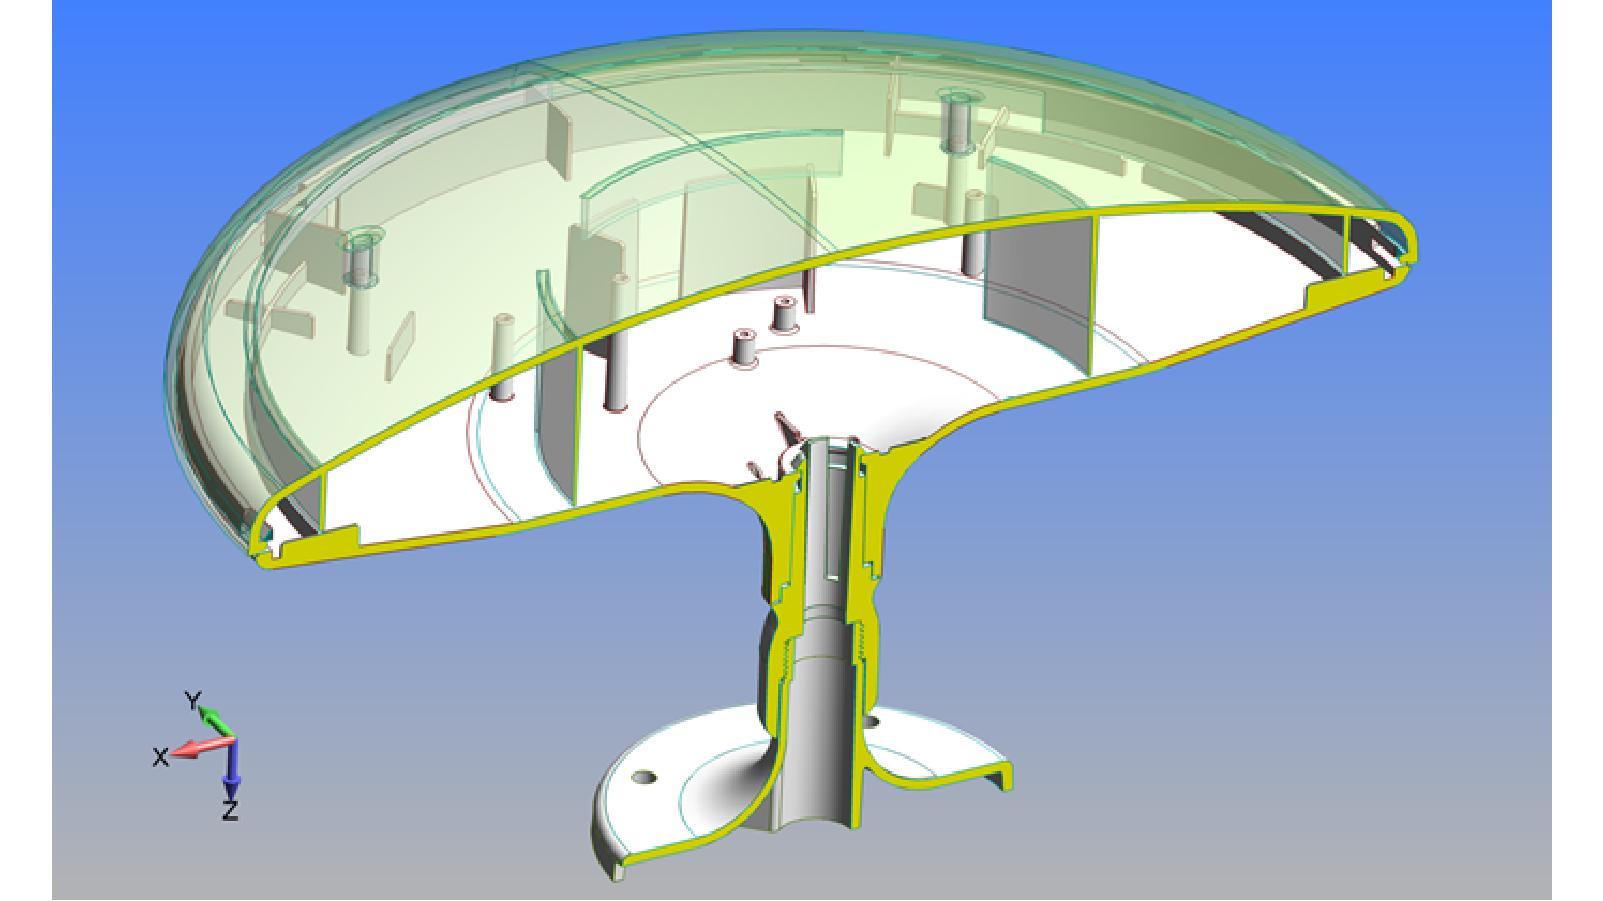 Initial CAD geometry for modern all-plastic antenna design